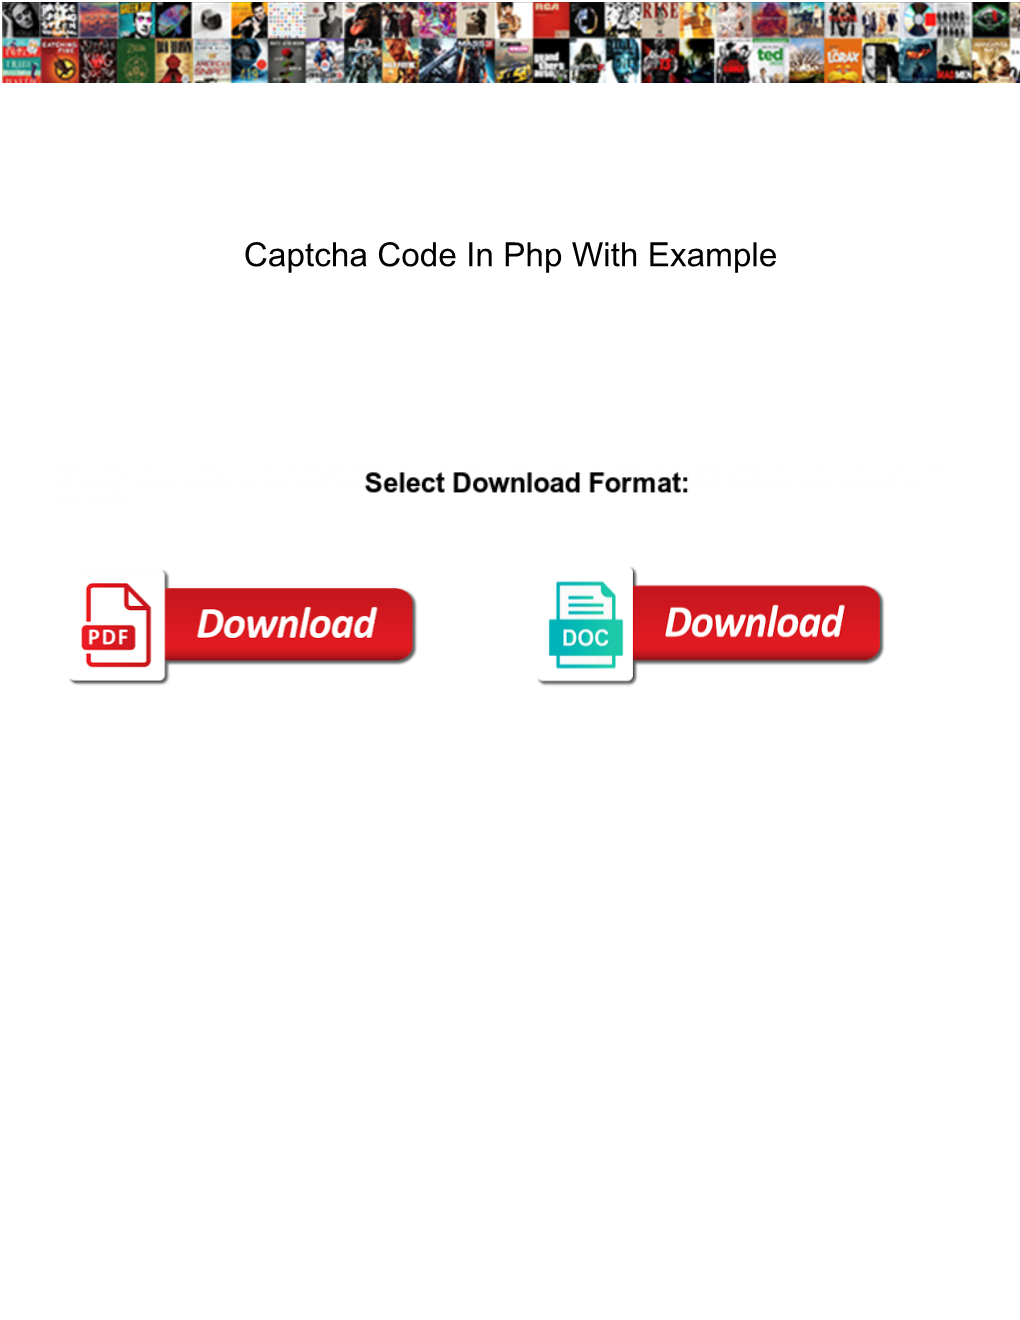 Captcha Code in Php with Example